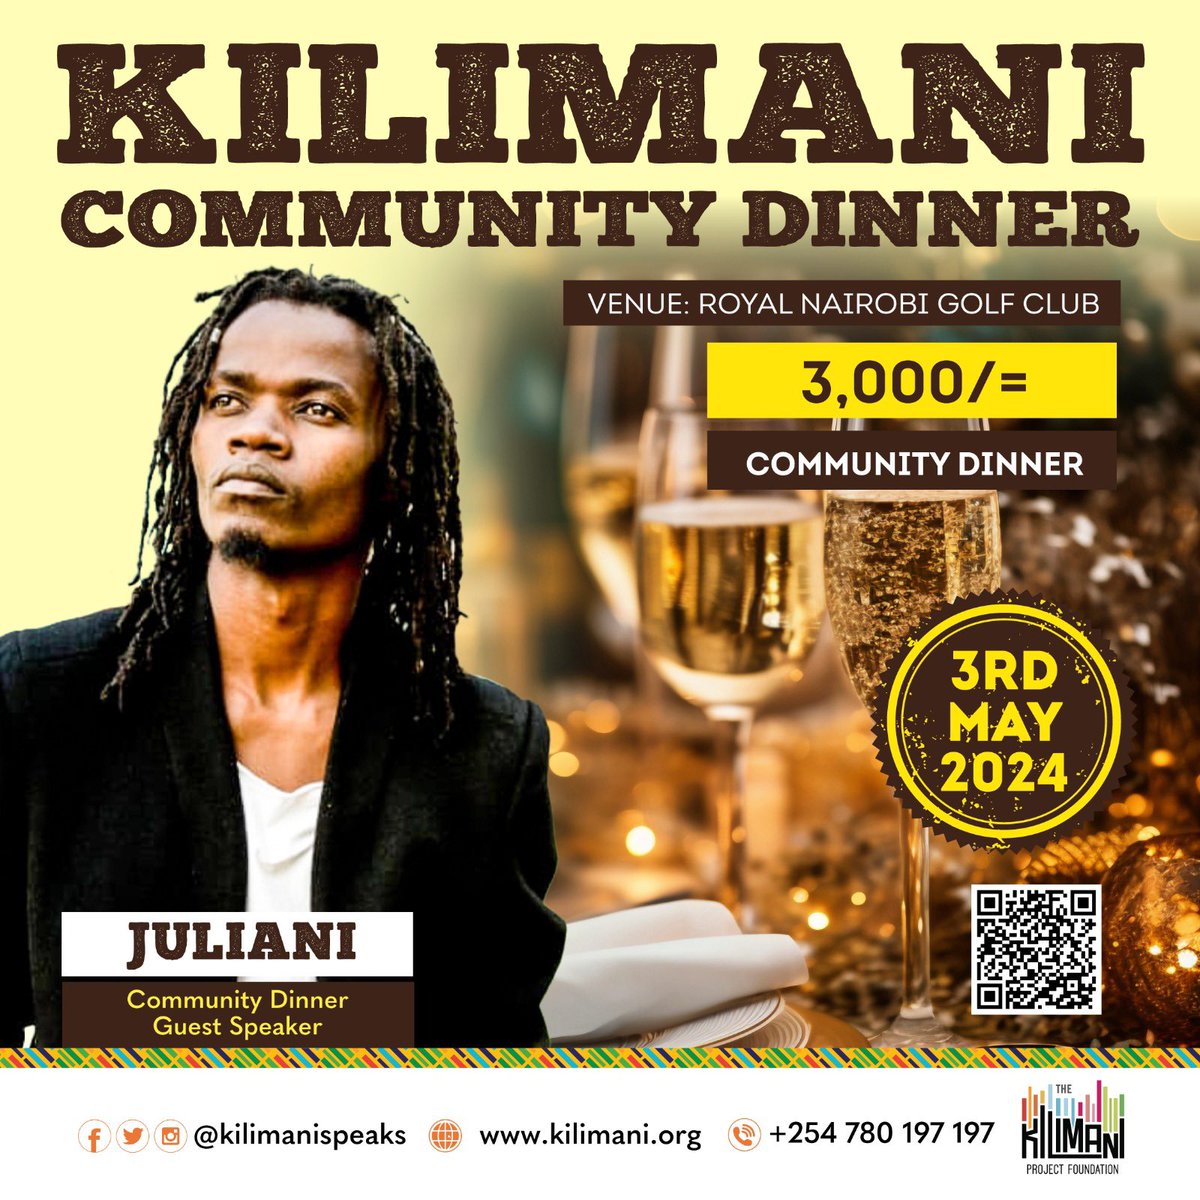 Have you purchased your tickets for the community dinner or are you ready to see videos and pictures kwa mtandao😂? Next Friday, we have @julianikenya coming to our community dinner🥳. All community members are invited to join us for a lively, loving, and laughter-filled…